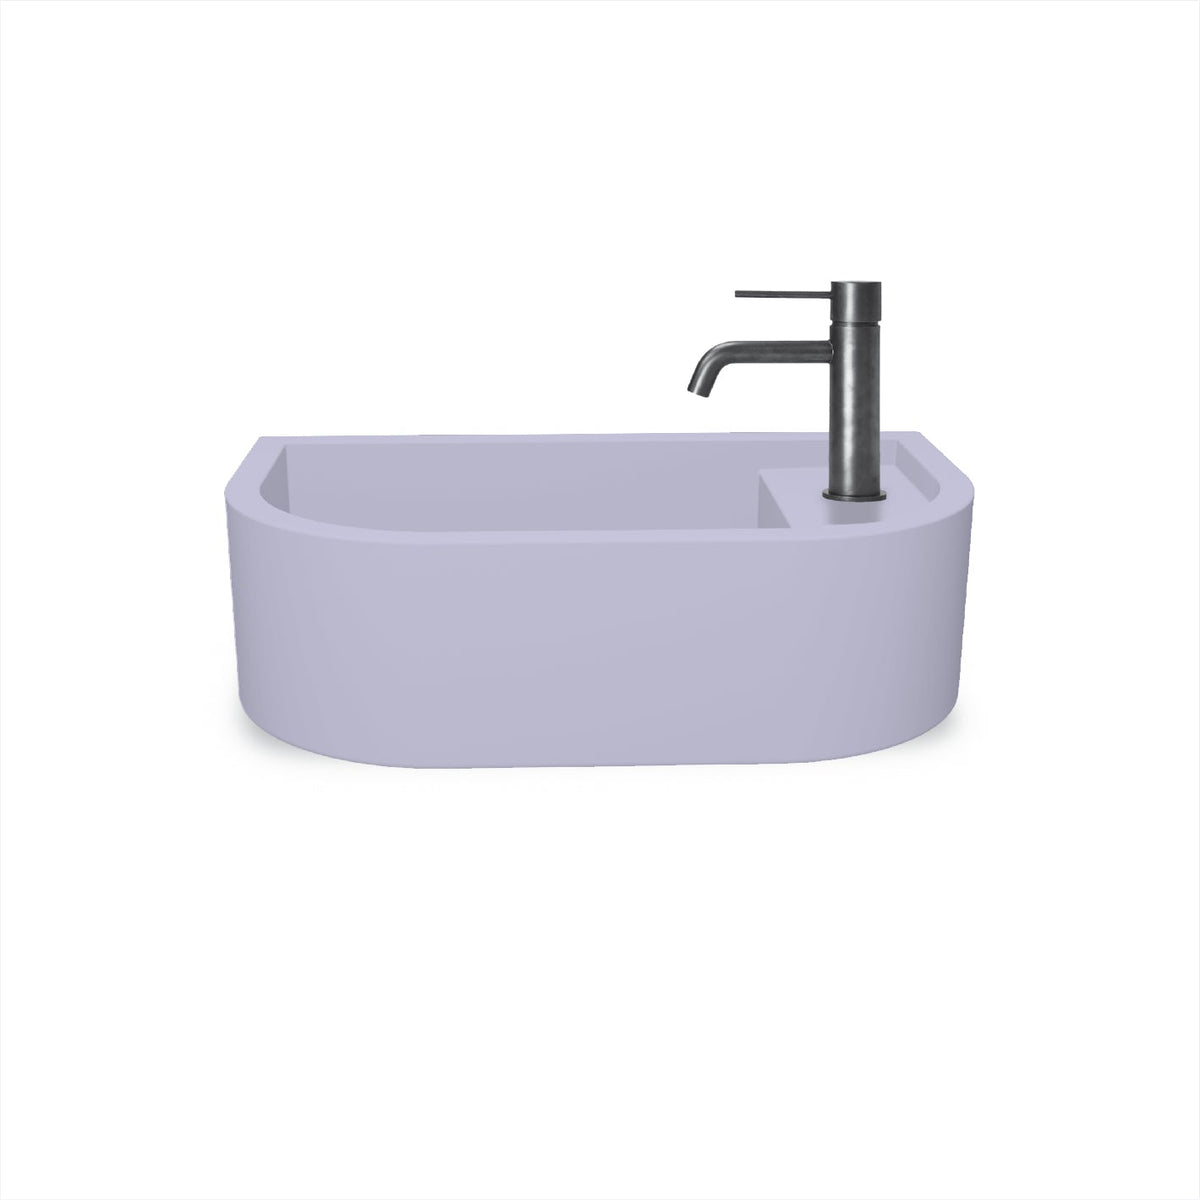 Loop 01 Basin - Overflow - Surface Mount (Lilac,Tap Hole,White)